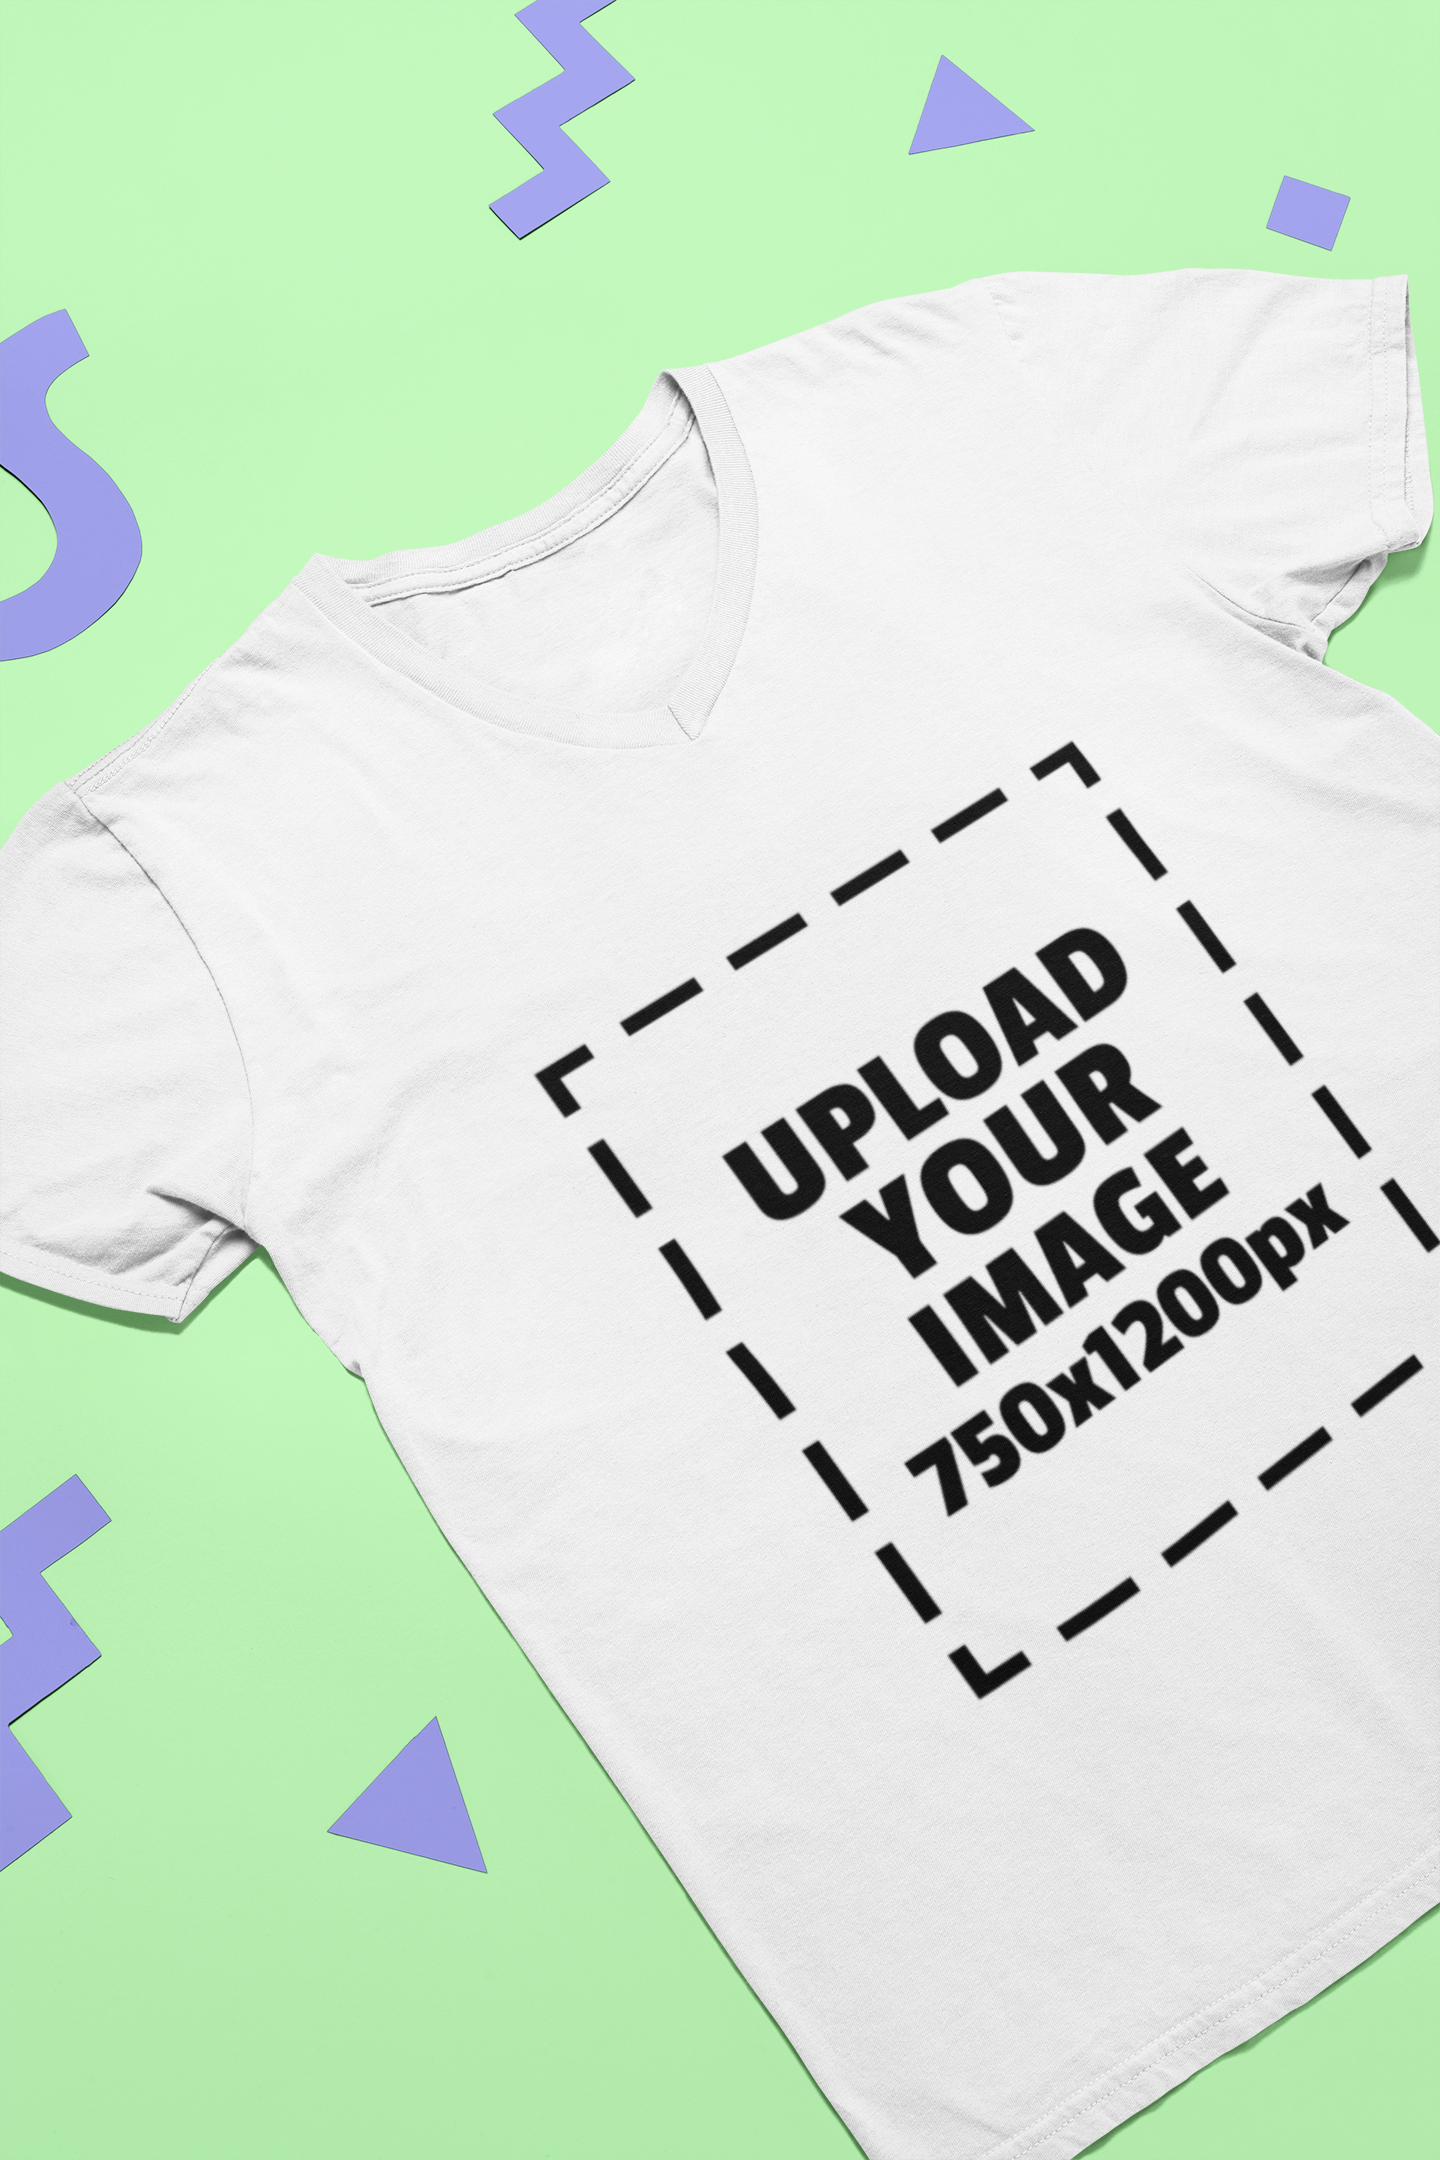 Download Mockup of a T-Shirt Lying Flat over Cut out Shapes by Placeit | Free Mockup